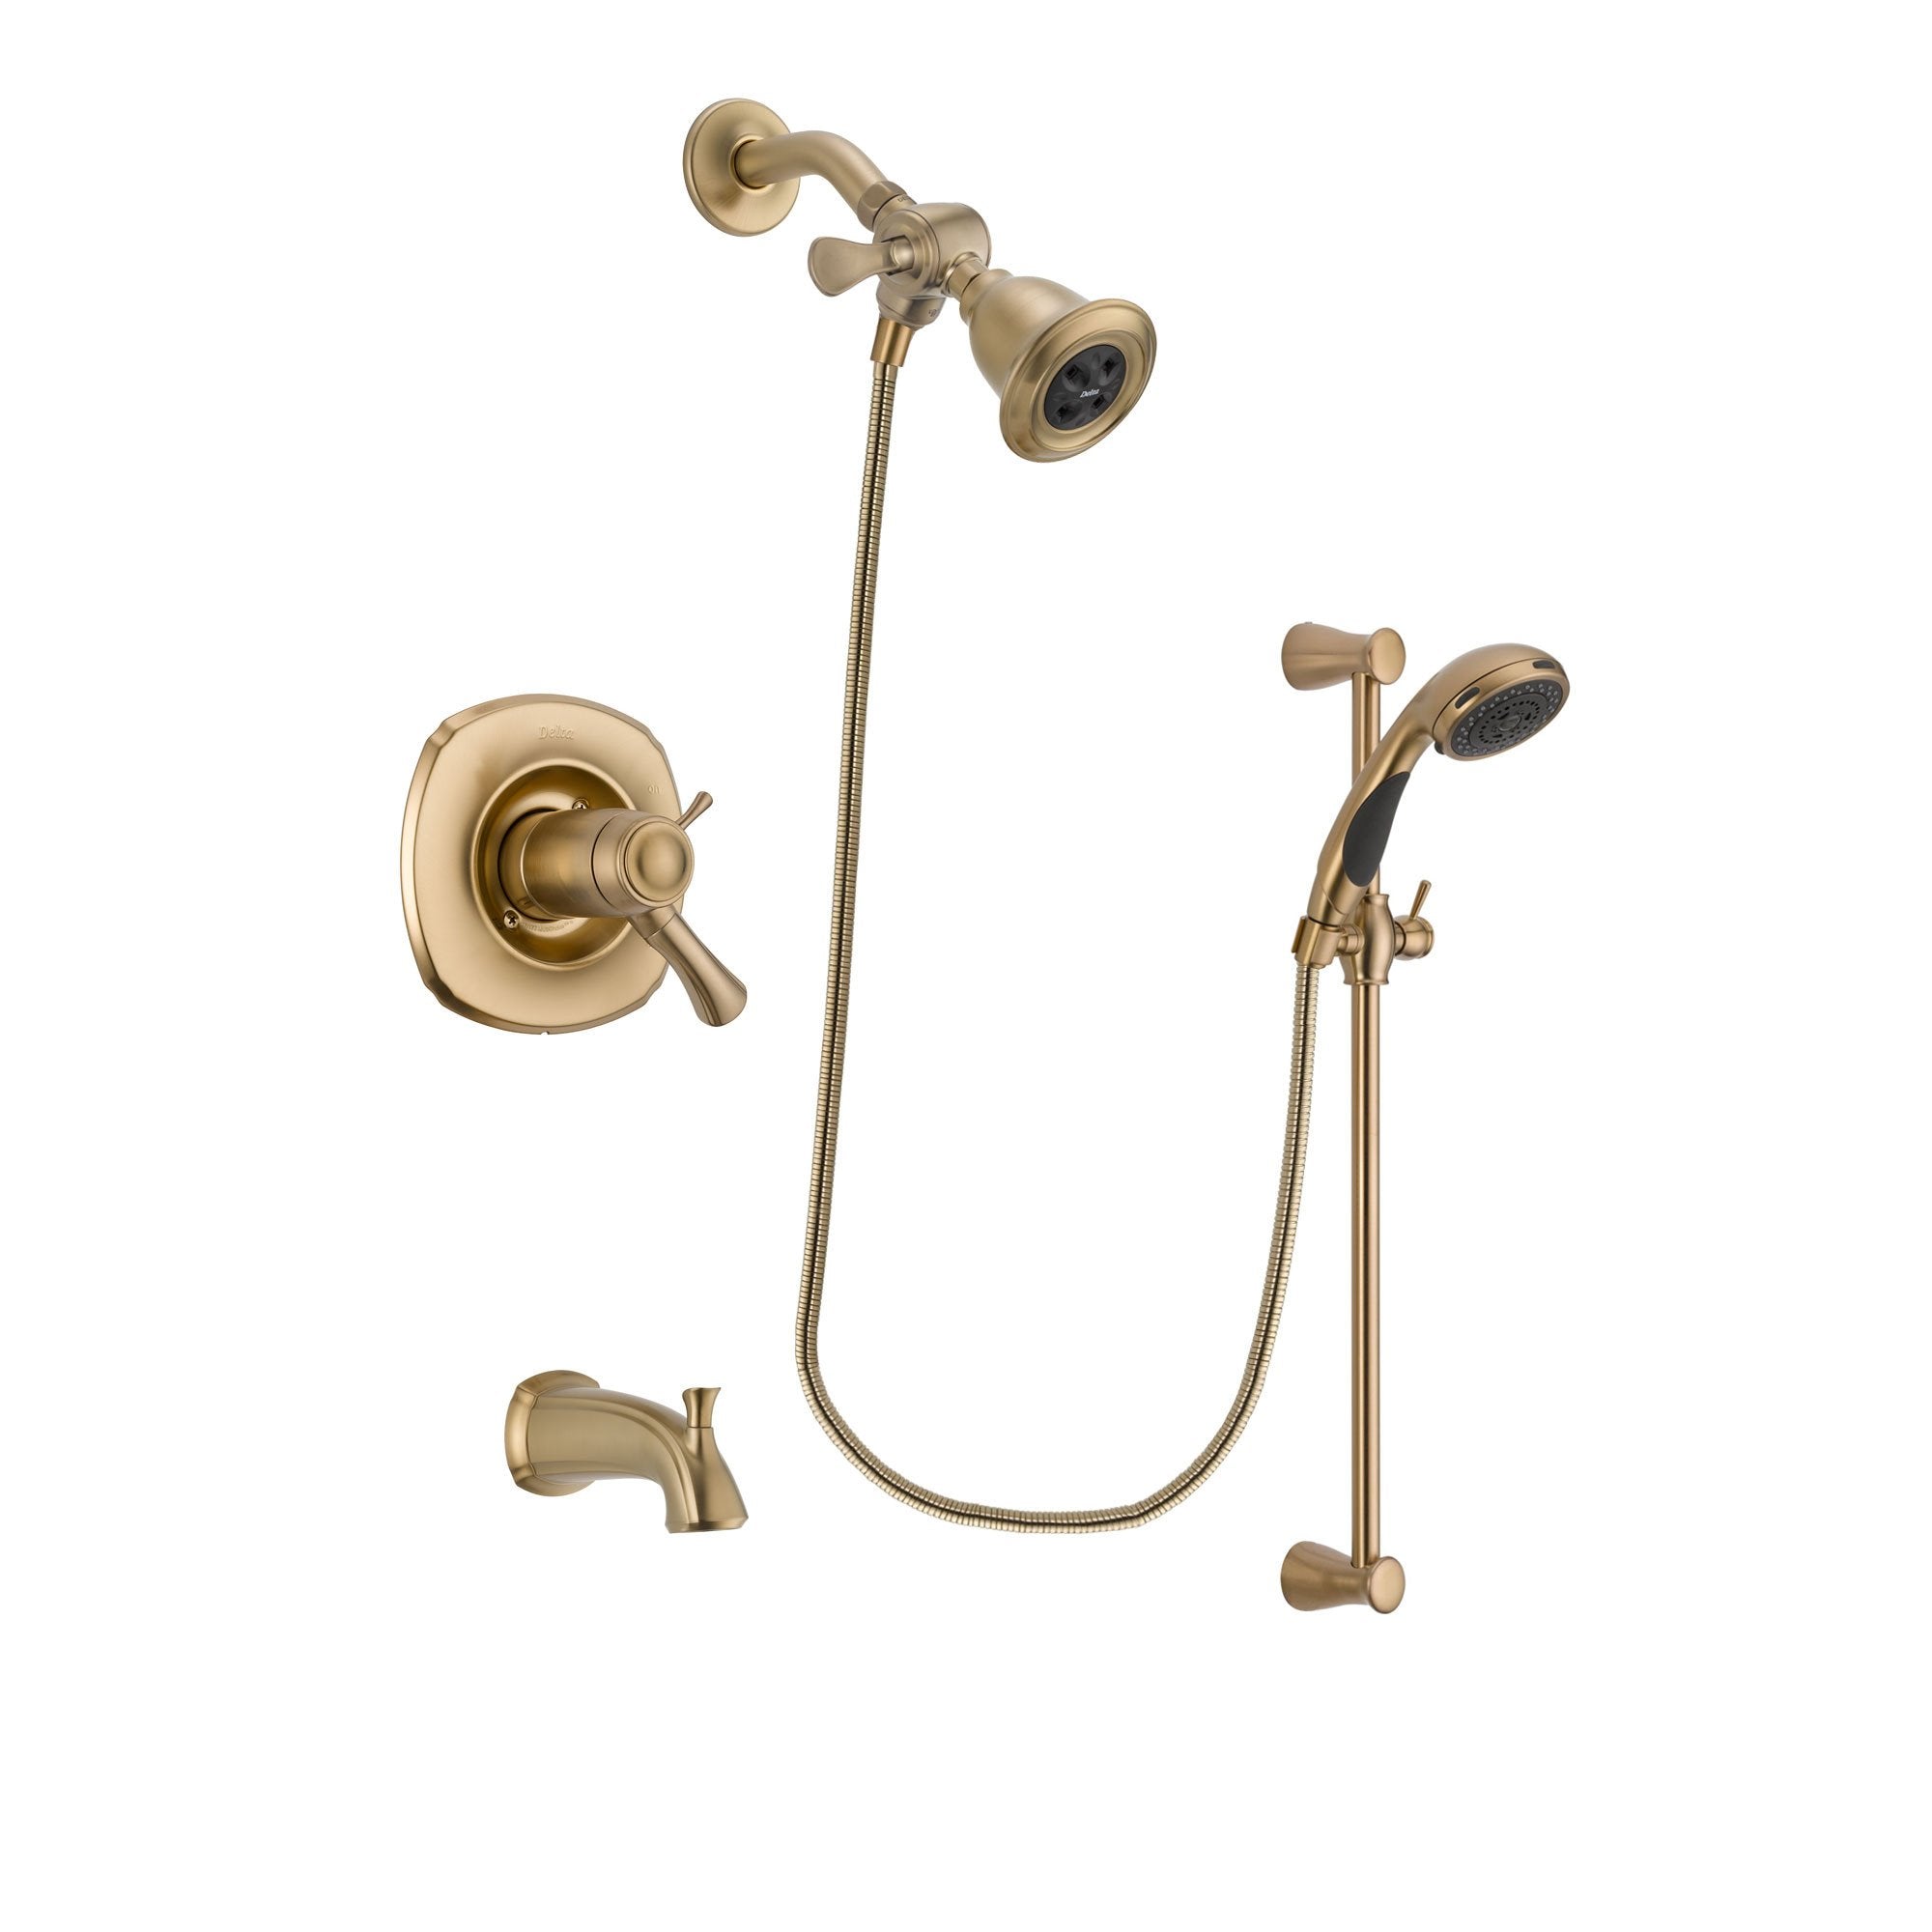 Delta Addison Champagne Bronze Finish Thermostatic Tub and Shower Faucet System Package with Water Efficient Showerhead and Personal Handheld Shower Sprayer with Slide Bar Includes Rough-in Valve and Tub Spout DSP3451V